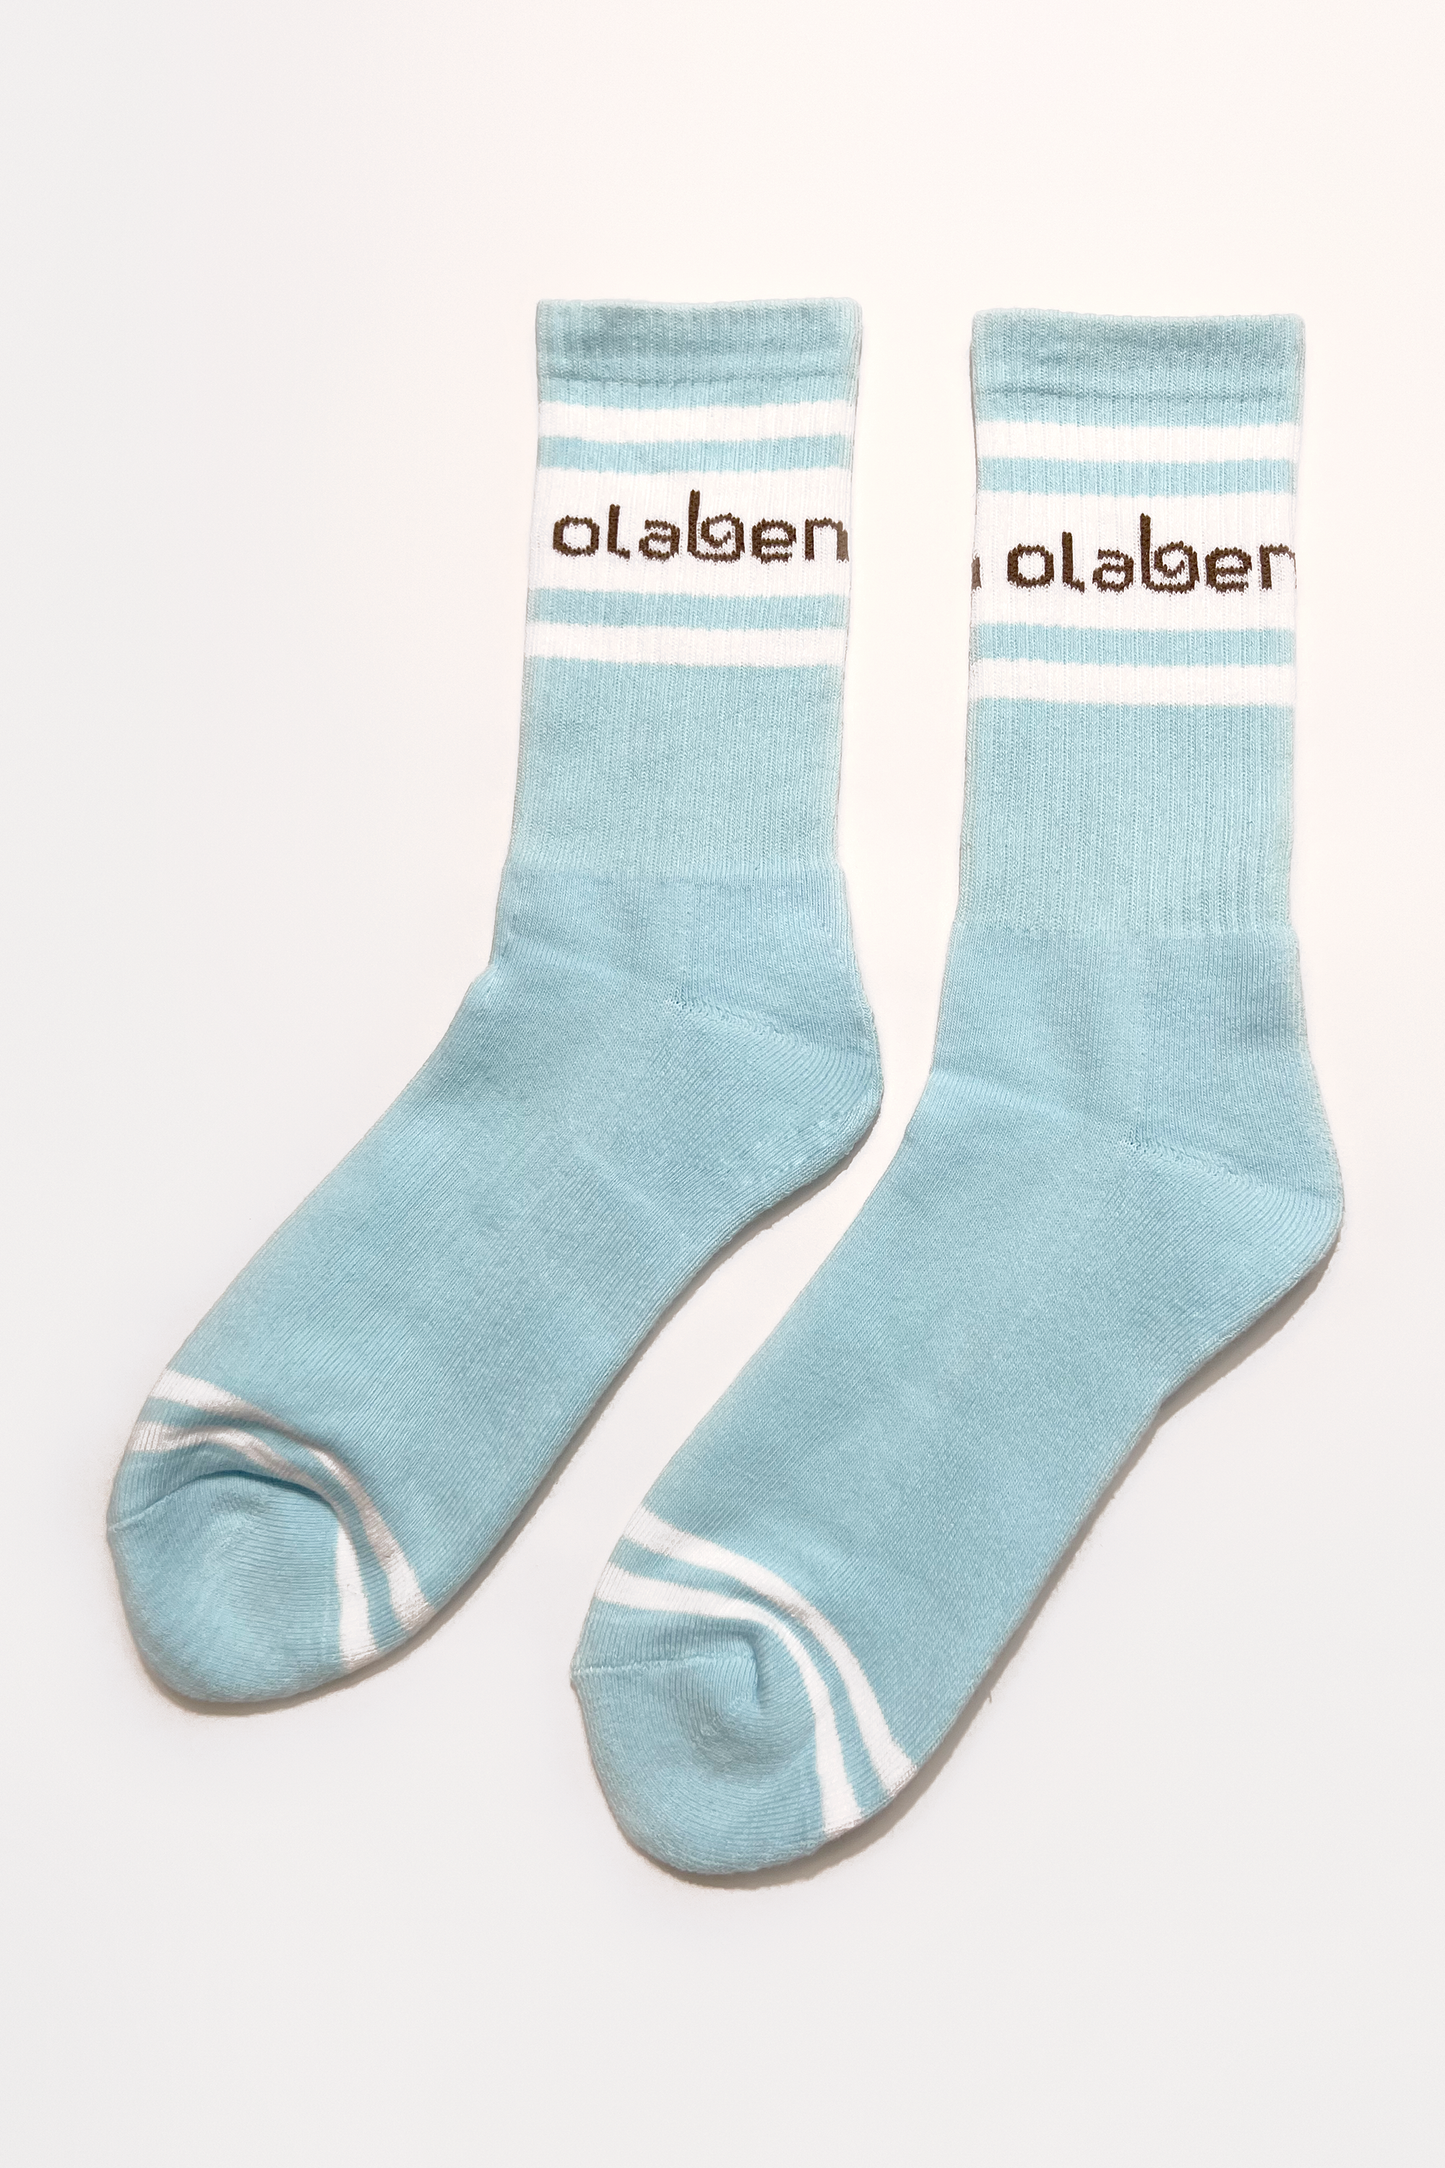 Colorful assortment of cozy quarter socks in ice blue, perfect for cloud-inspired fashion.